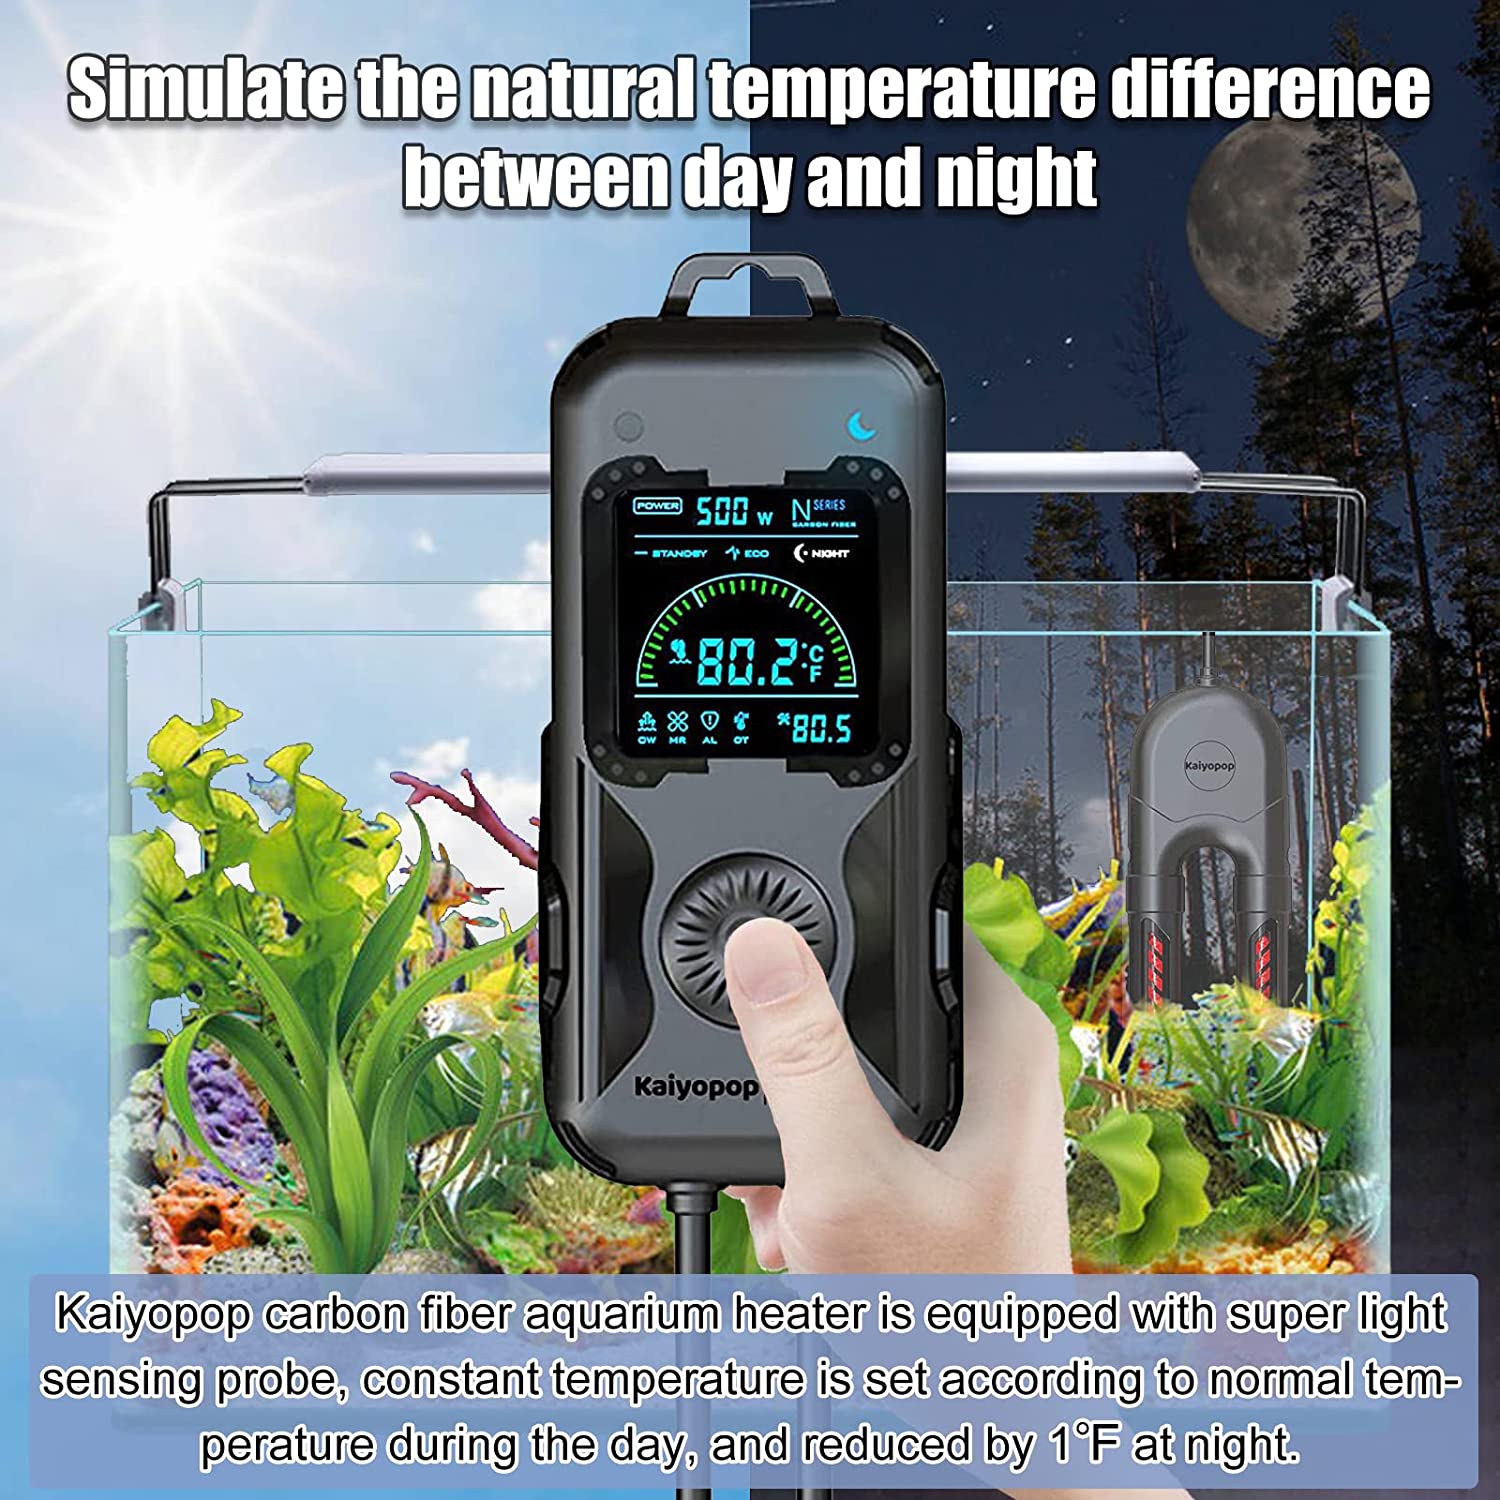 Simulate the natural temperature difference between day and night